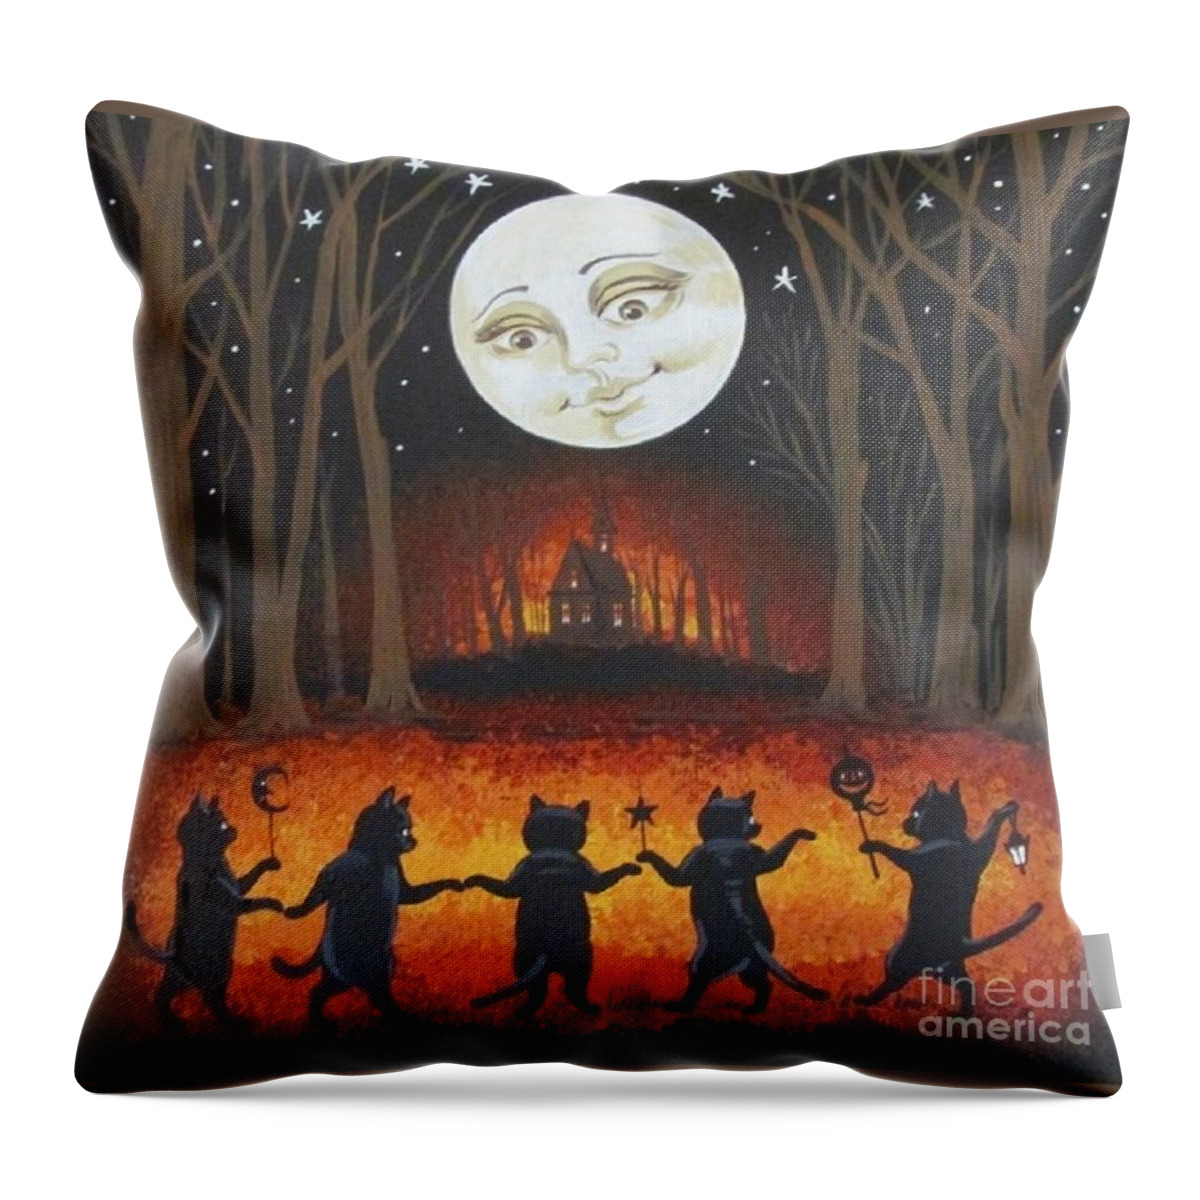 Print Throw Pillow featuring the painting Haunted Dance by Margaryta Yermolayeva